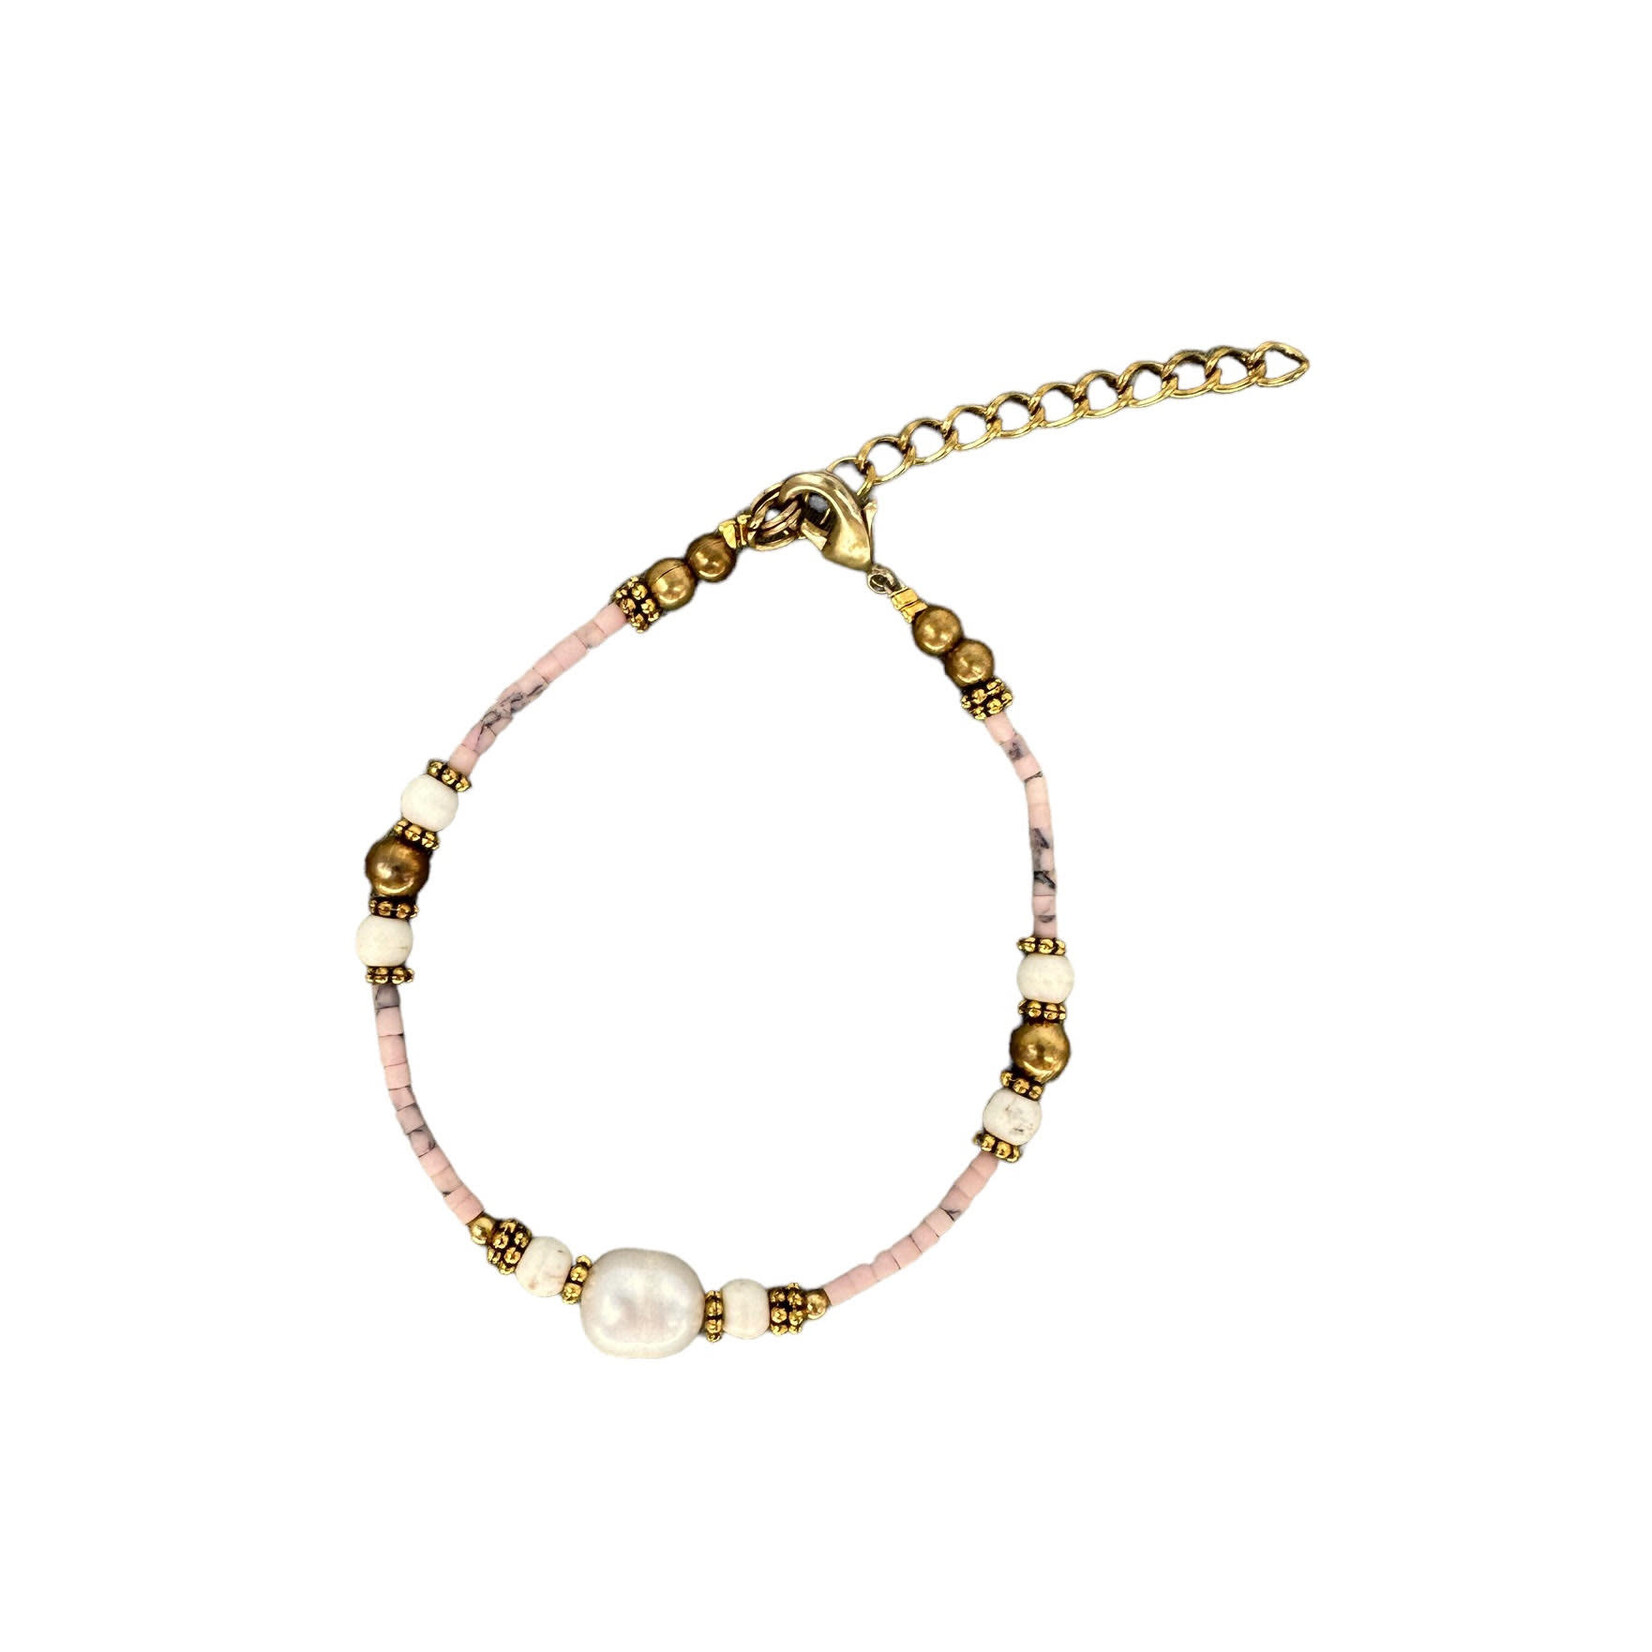 Pearl and Howlite Gemstone, Clay and Brass Bead Adjustable Bracelet Pink BB42